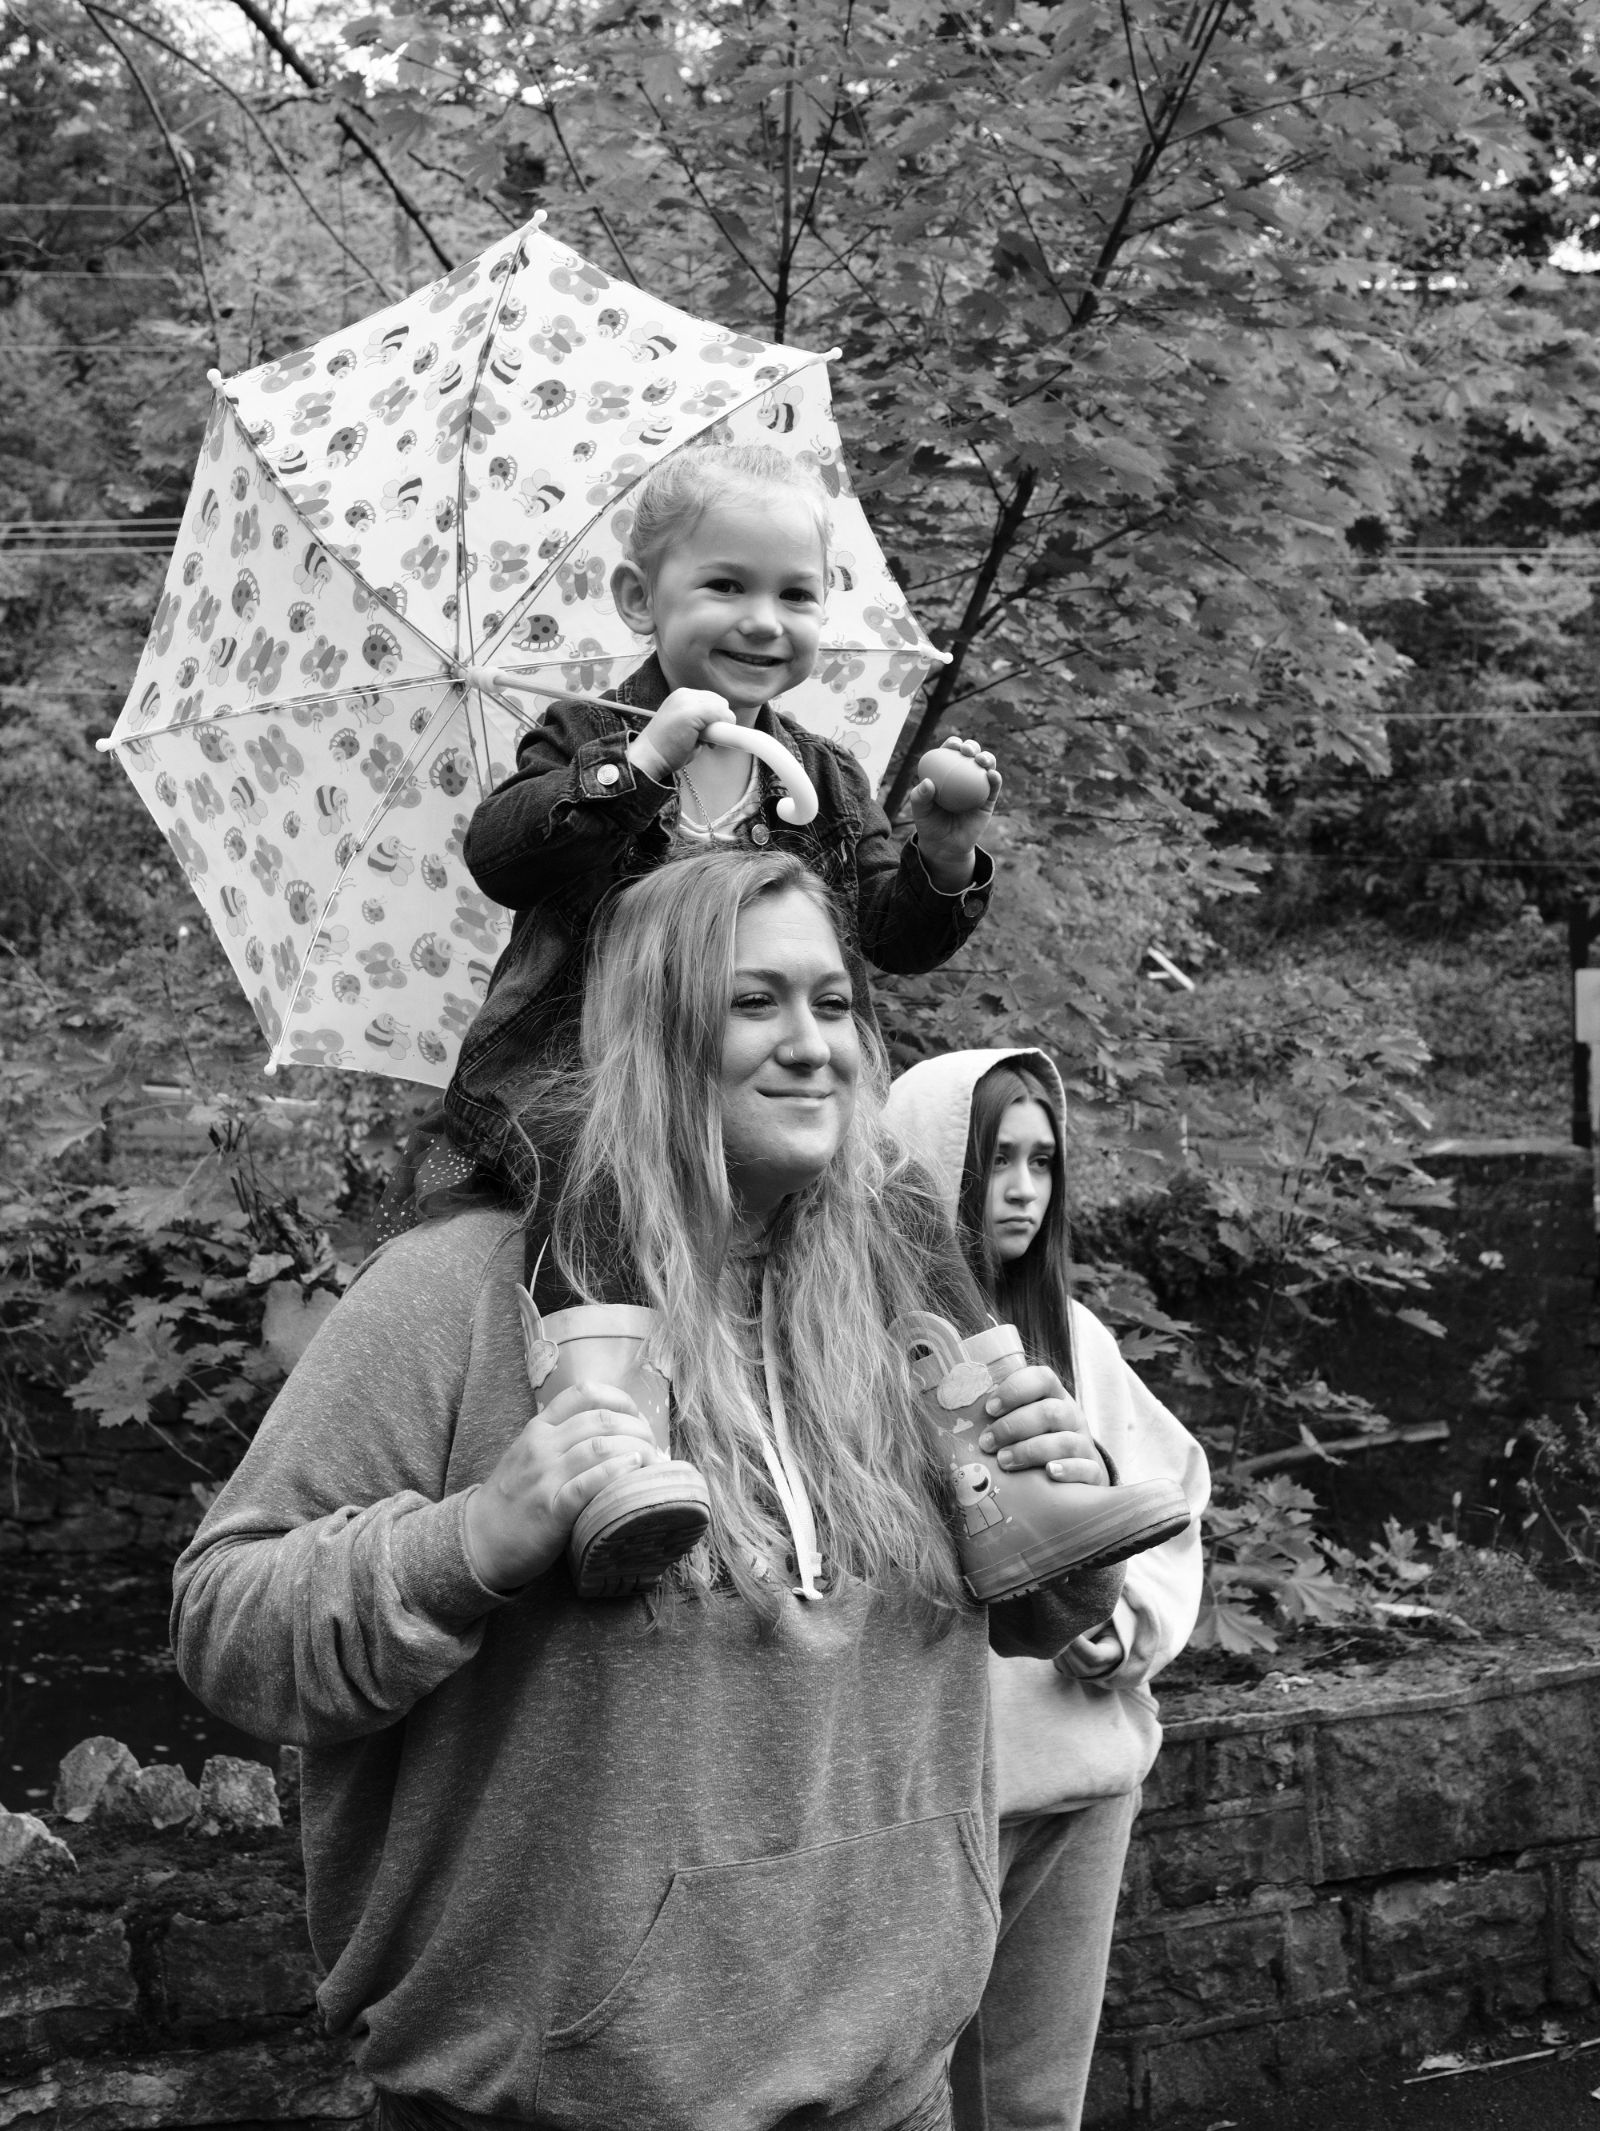 A mother and her two girls, the younger one a toddler on her shoulders holding an umbrella, watch the Come As You Art/Arf children and pets' costume parade on the Karl Stirner Arts Trail in Easton, Pennsylvania.